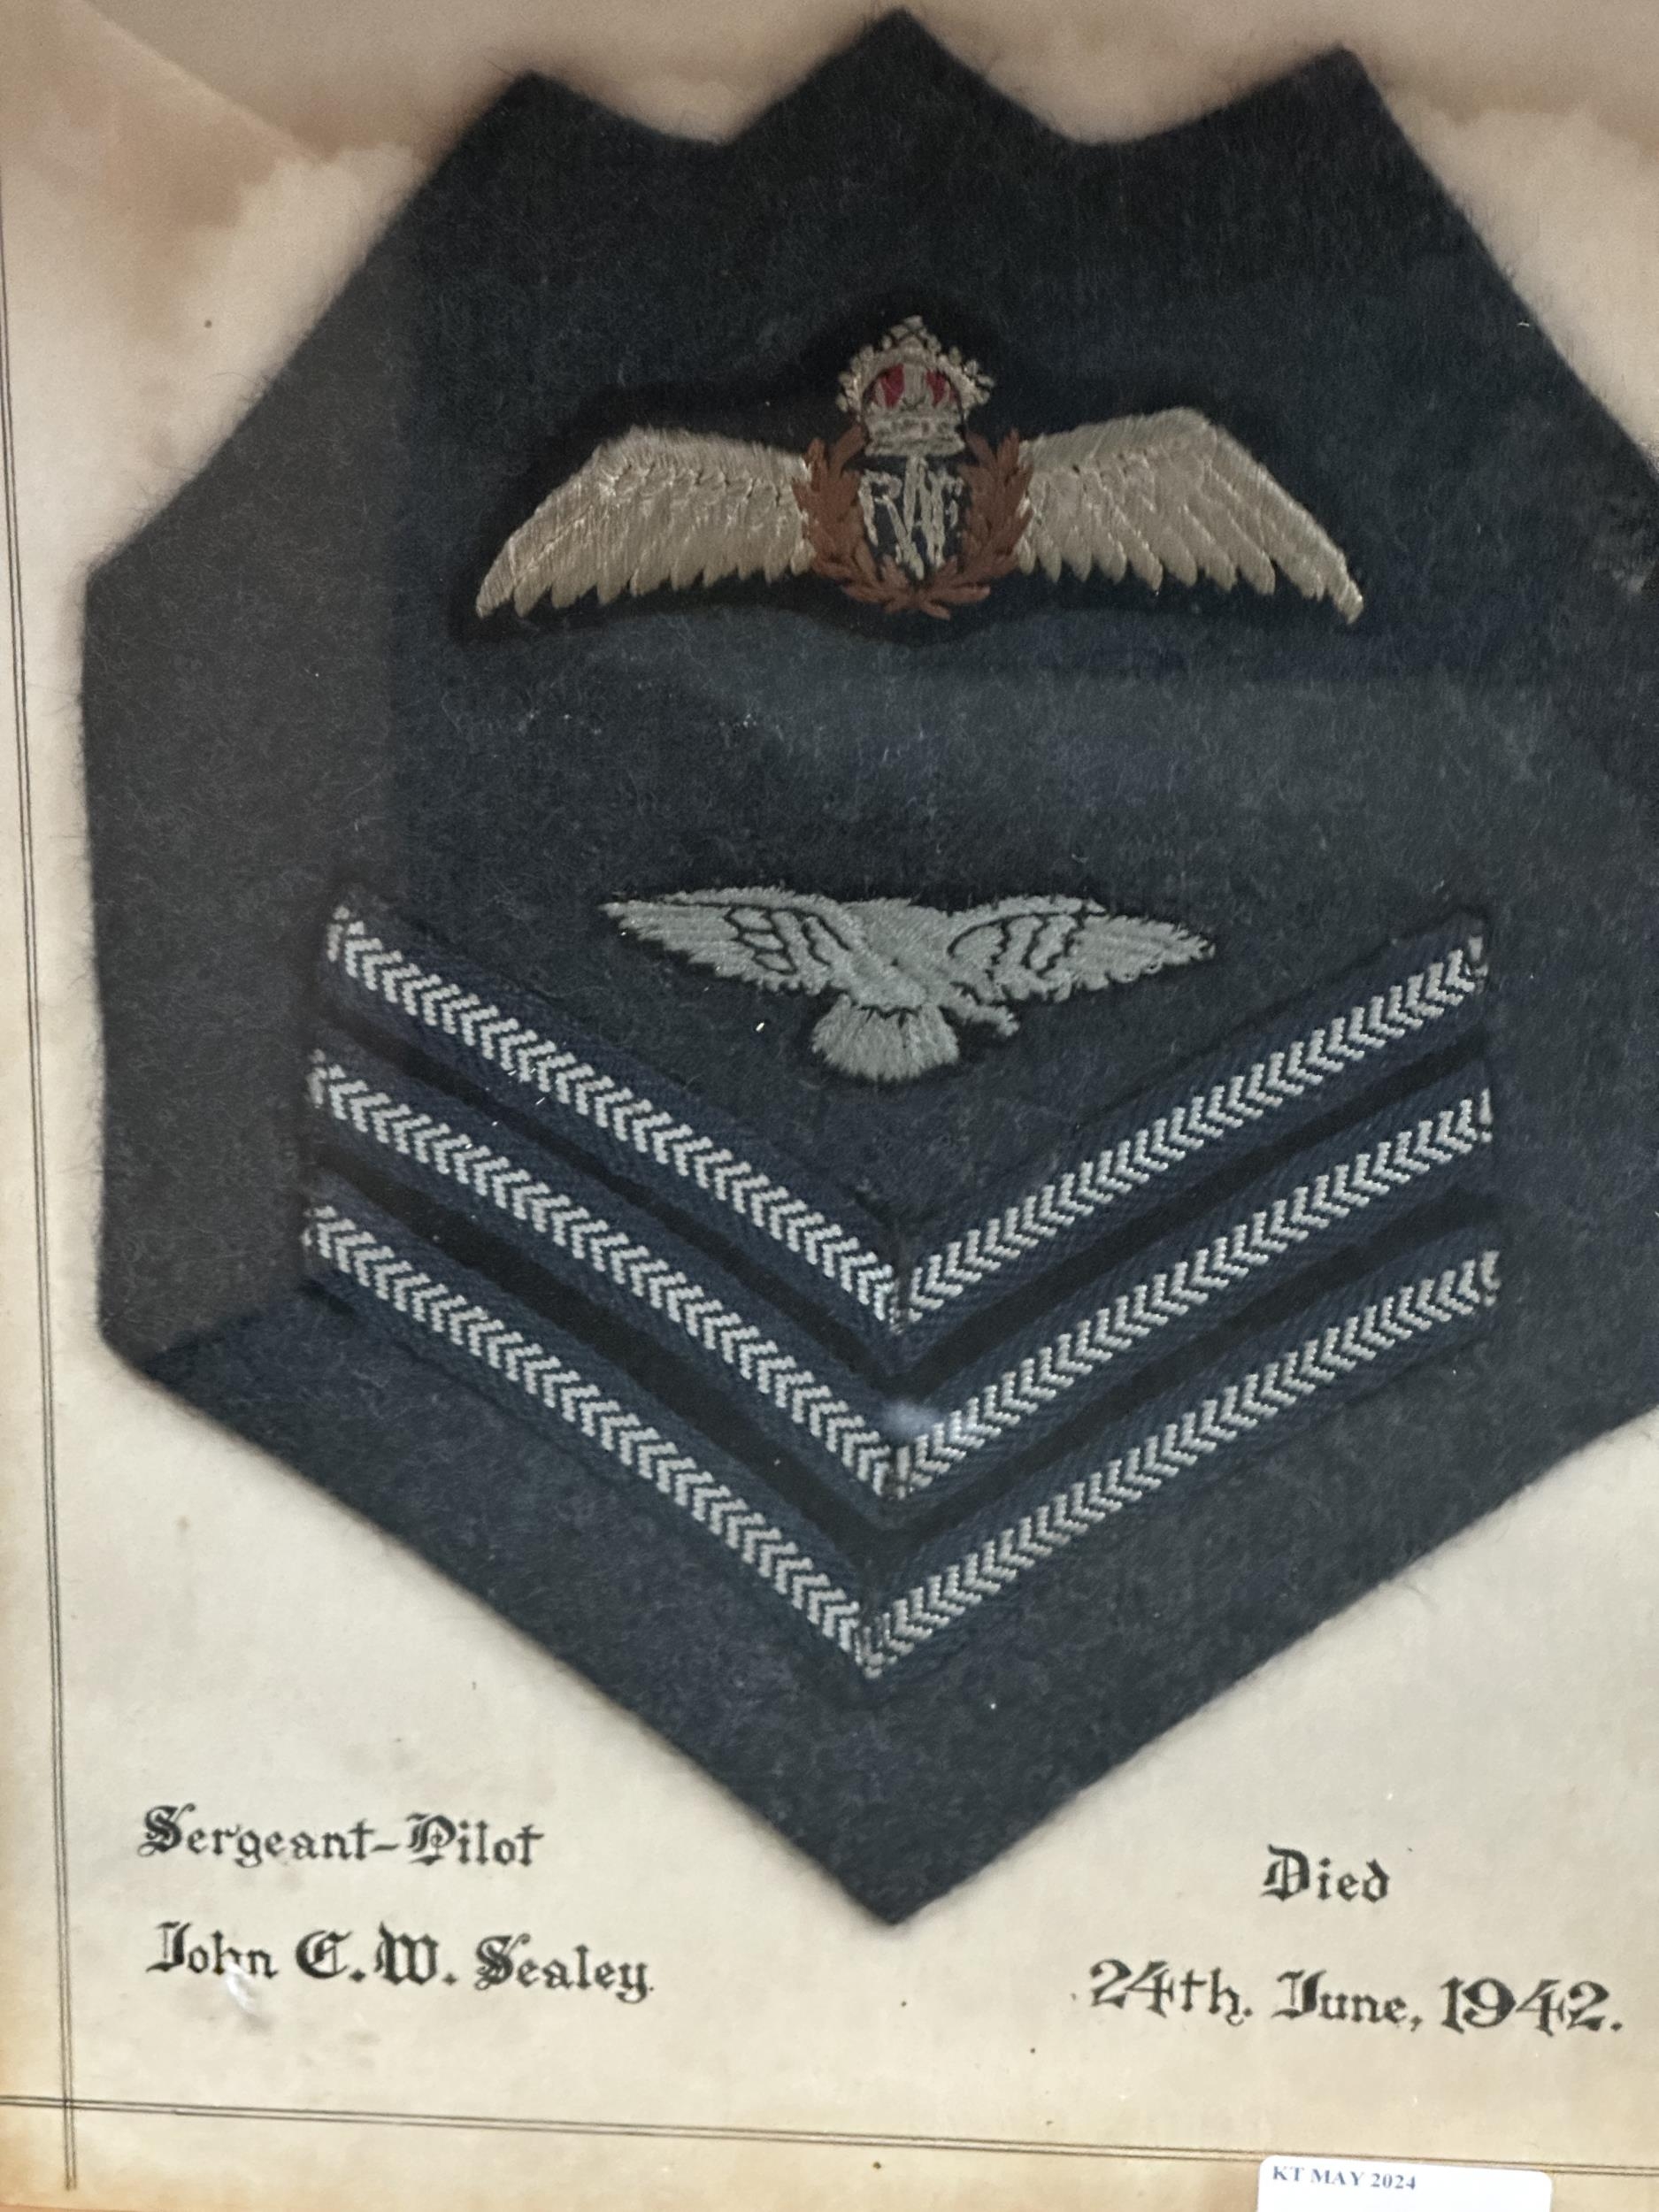 Cloth Insignia and patches for Sergeant Pilot John C W Sealey, died 24th June 1942, in a glazed - Image 2 of 2